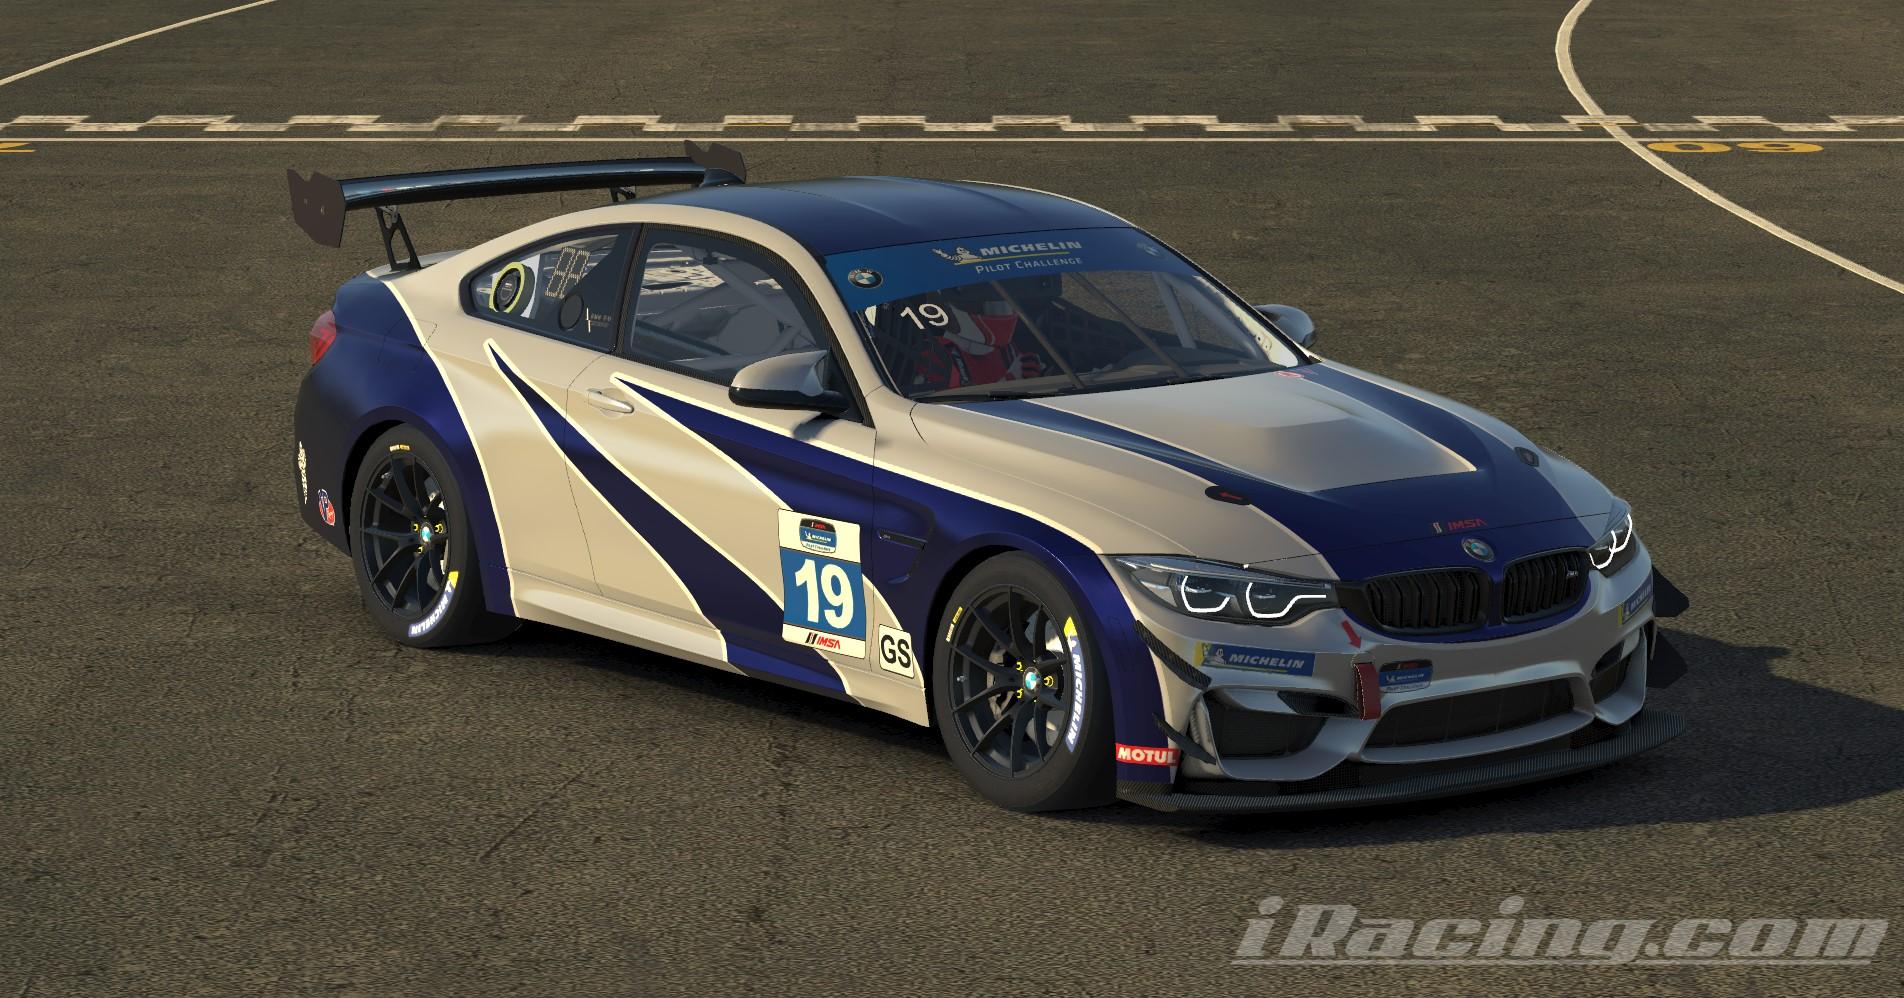 Most Wanted BMW M3 GTR by Michael Knight3 Trading Paints